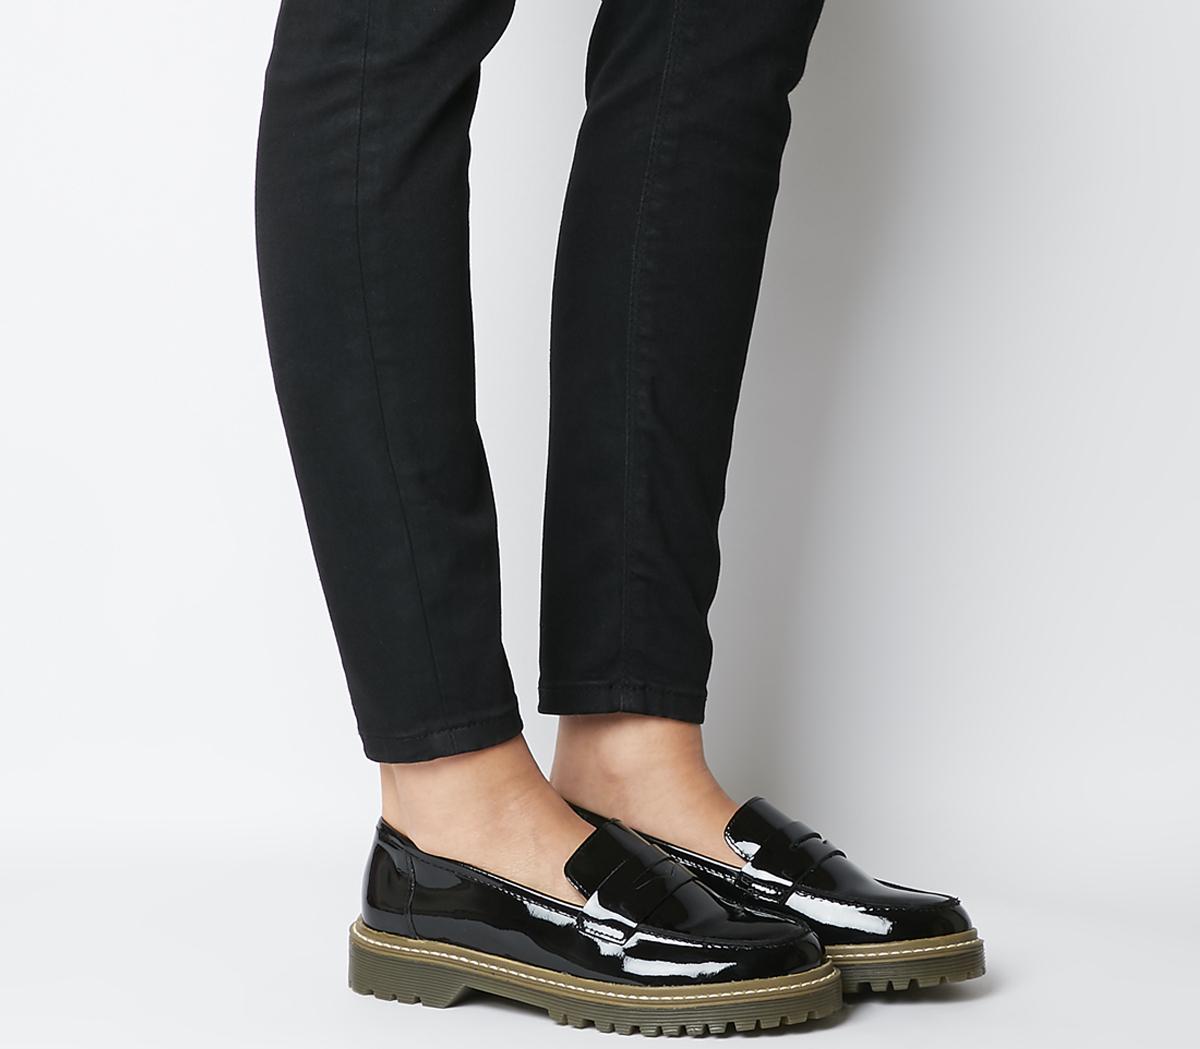 black patent loafer shoes